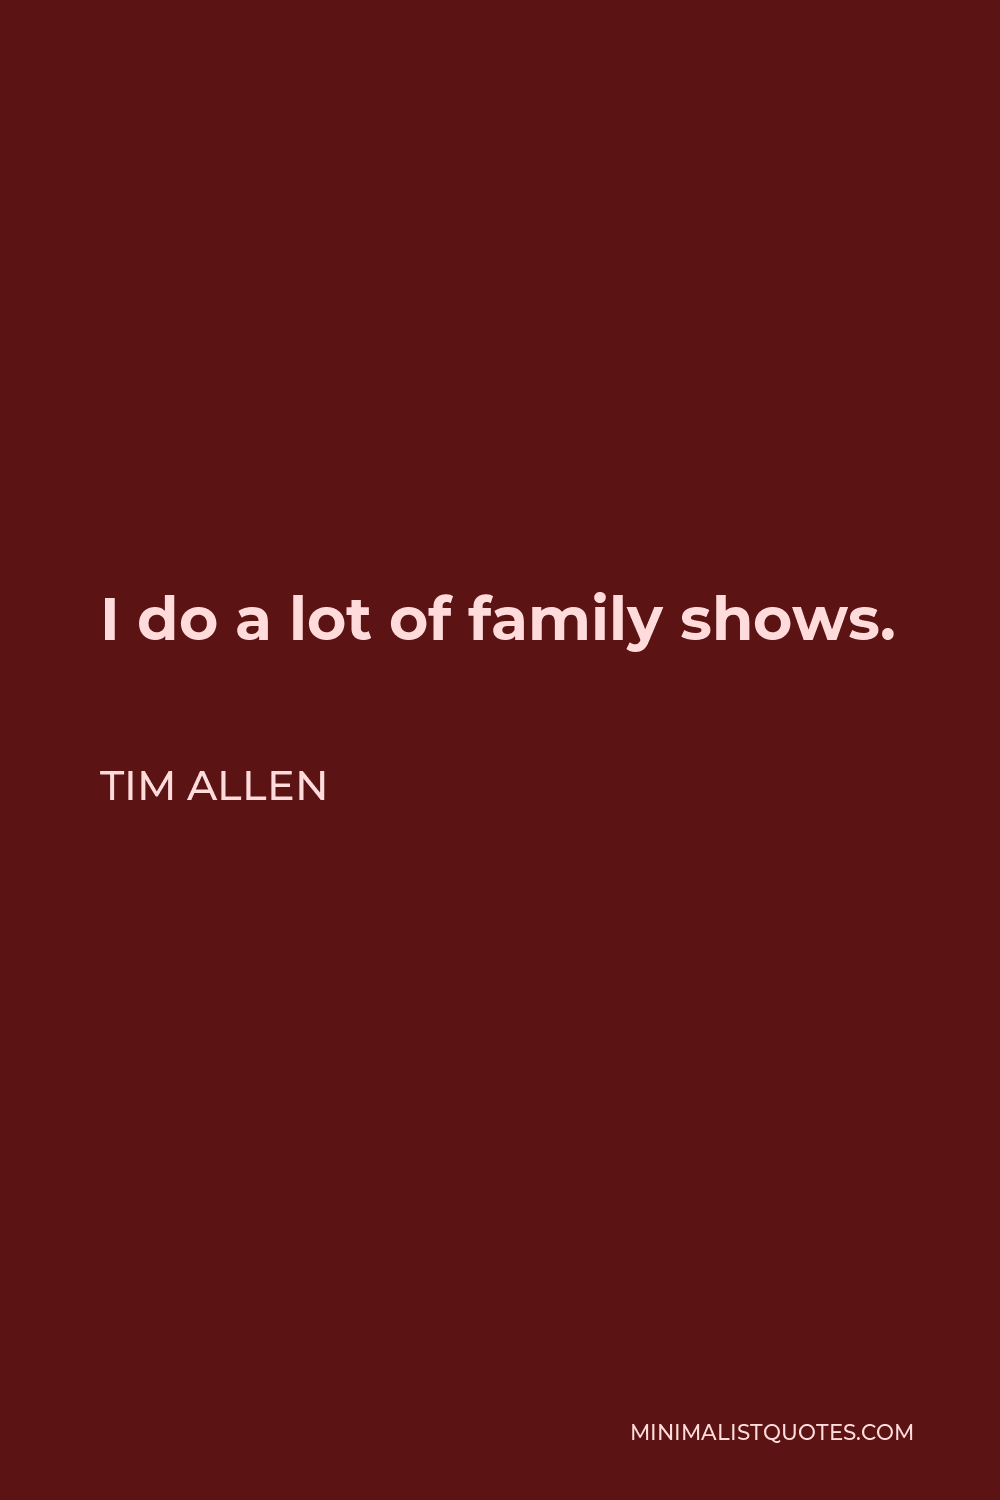 Tim Allen Quote - I do a lot of family shows.